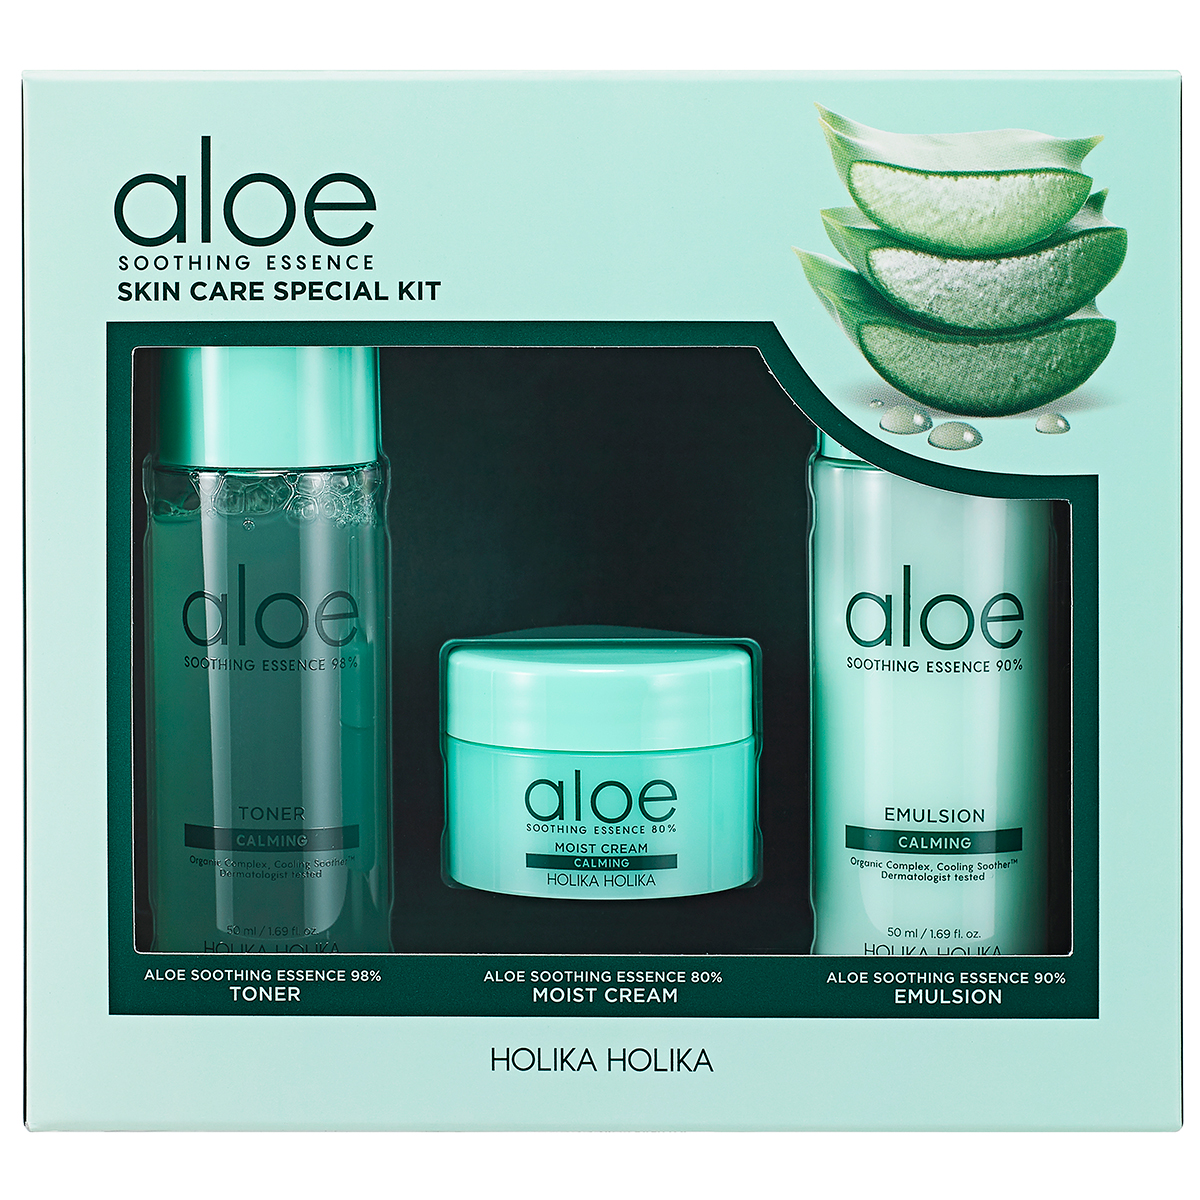 Aloe Soothing Essence Skin Care Special Kit, Holika Holika K-Beauty Kit Hudpleie - K-Beauty - K-Beauty Kit